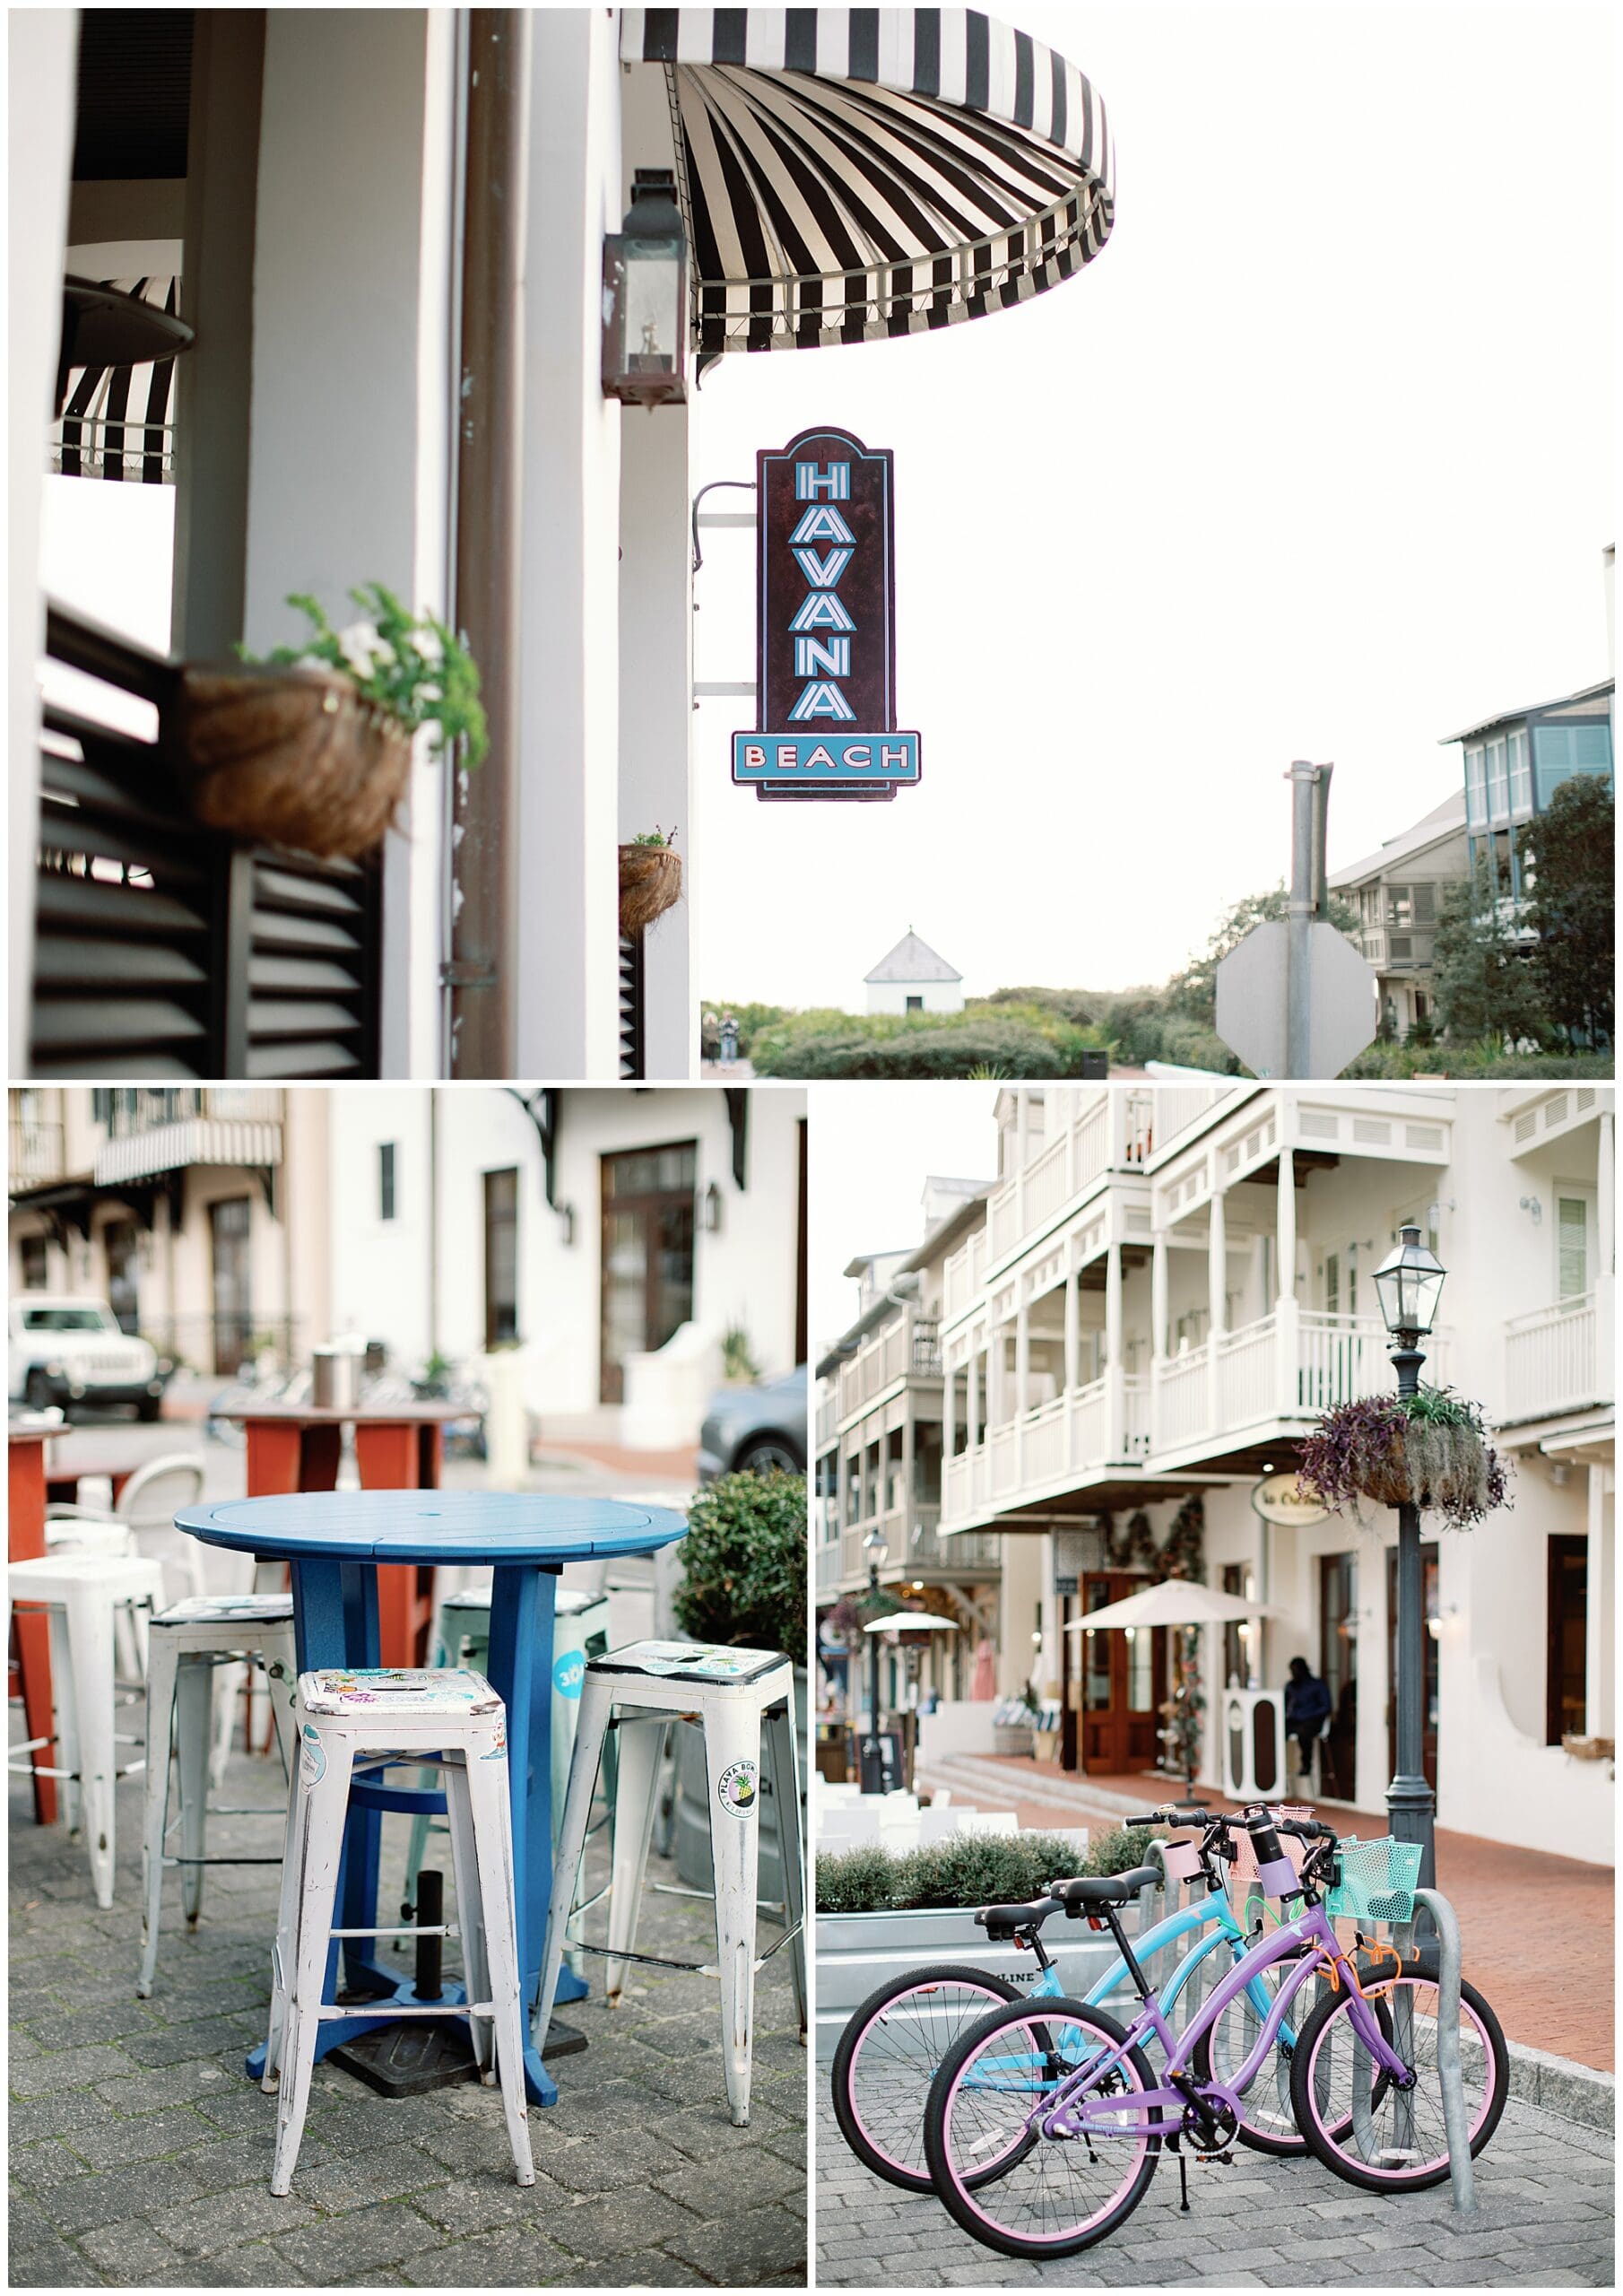 A series of photos showing bicycles parked in front of a restaurant.